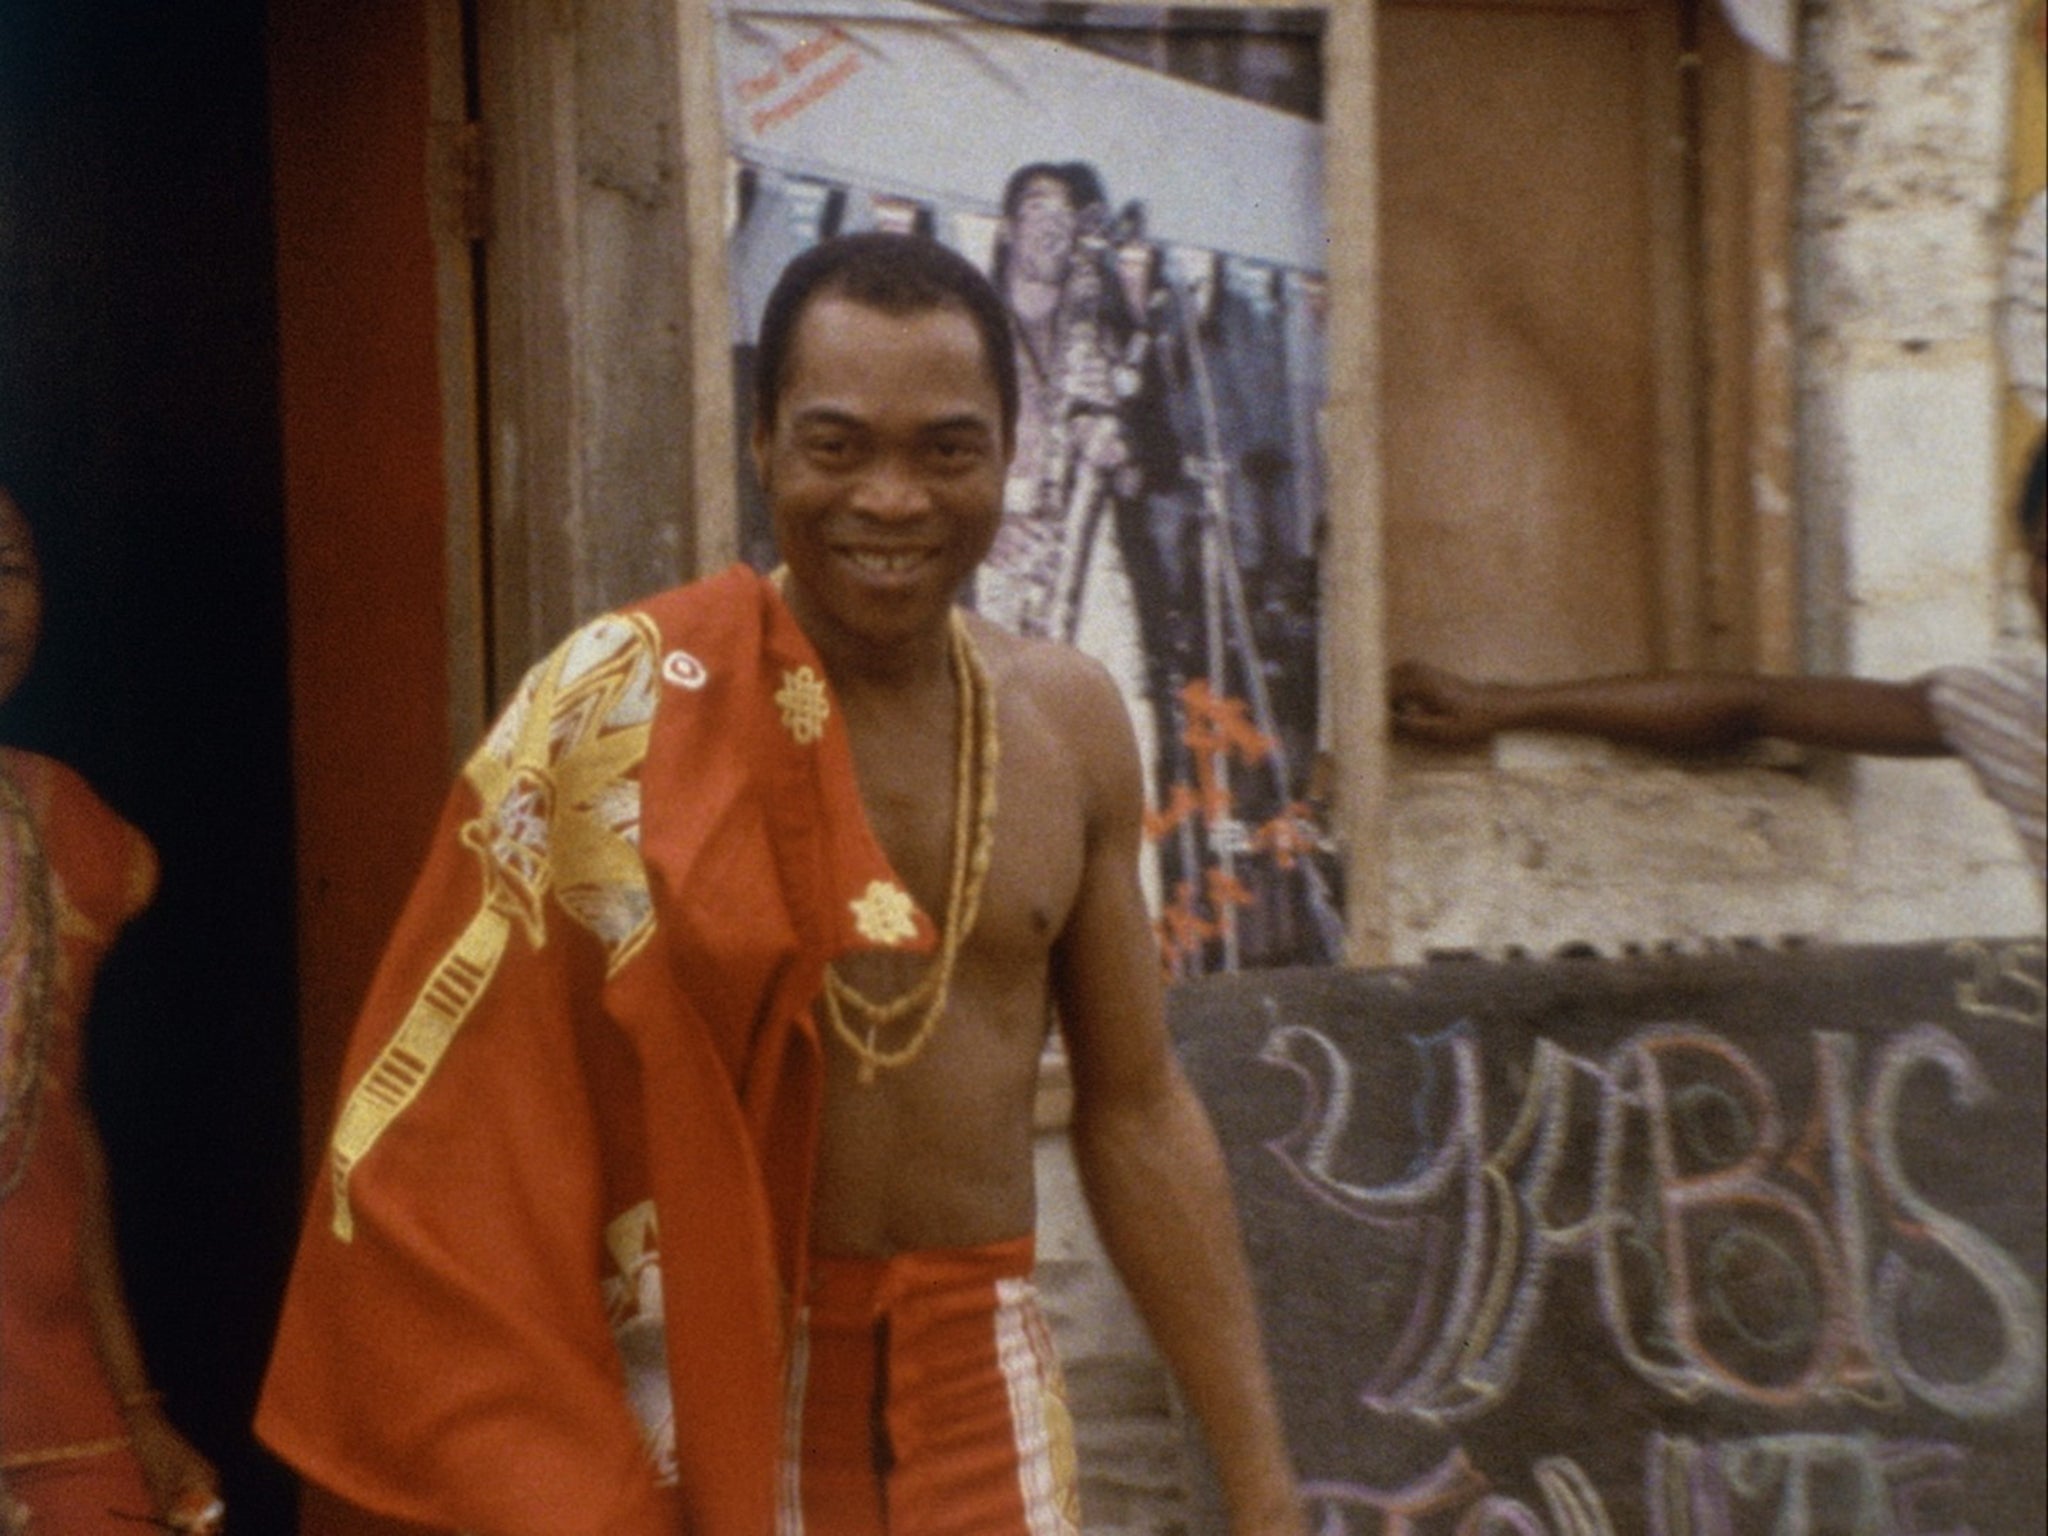 Fela died in the late 1990s but Gibney has assembled plenty of footage of him